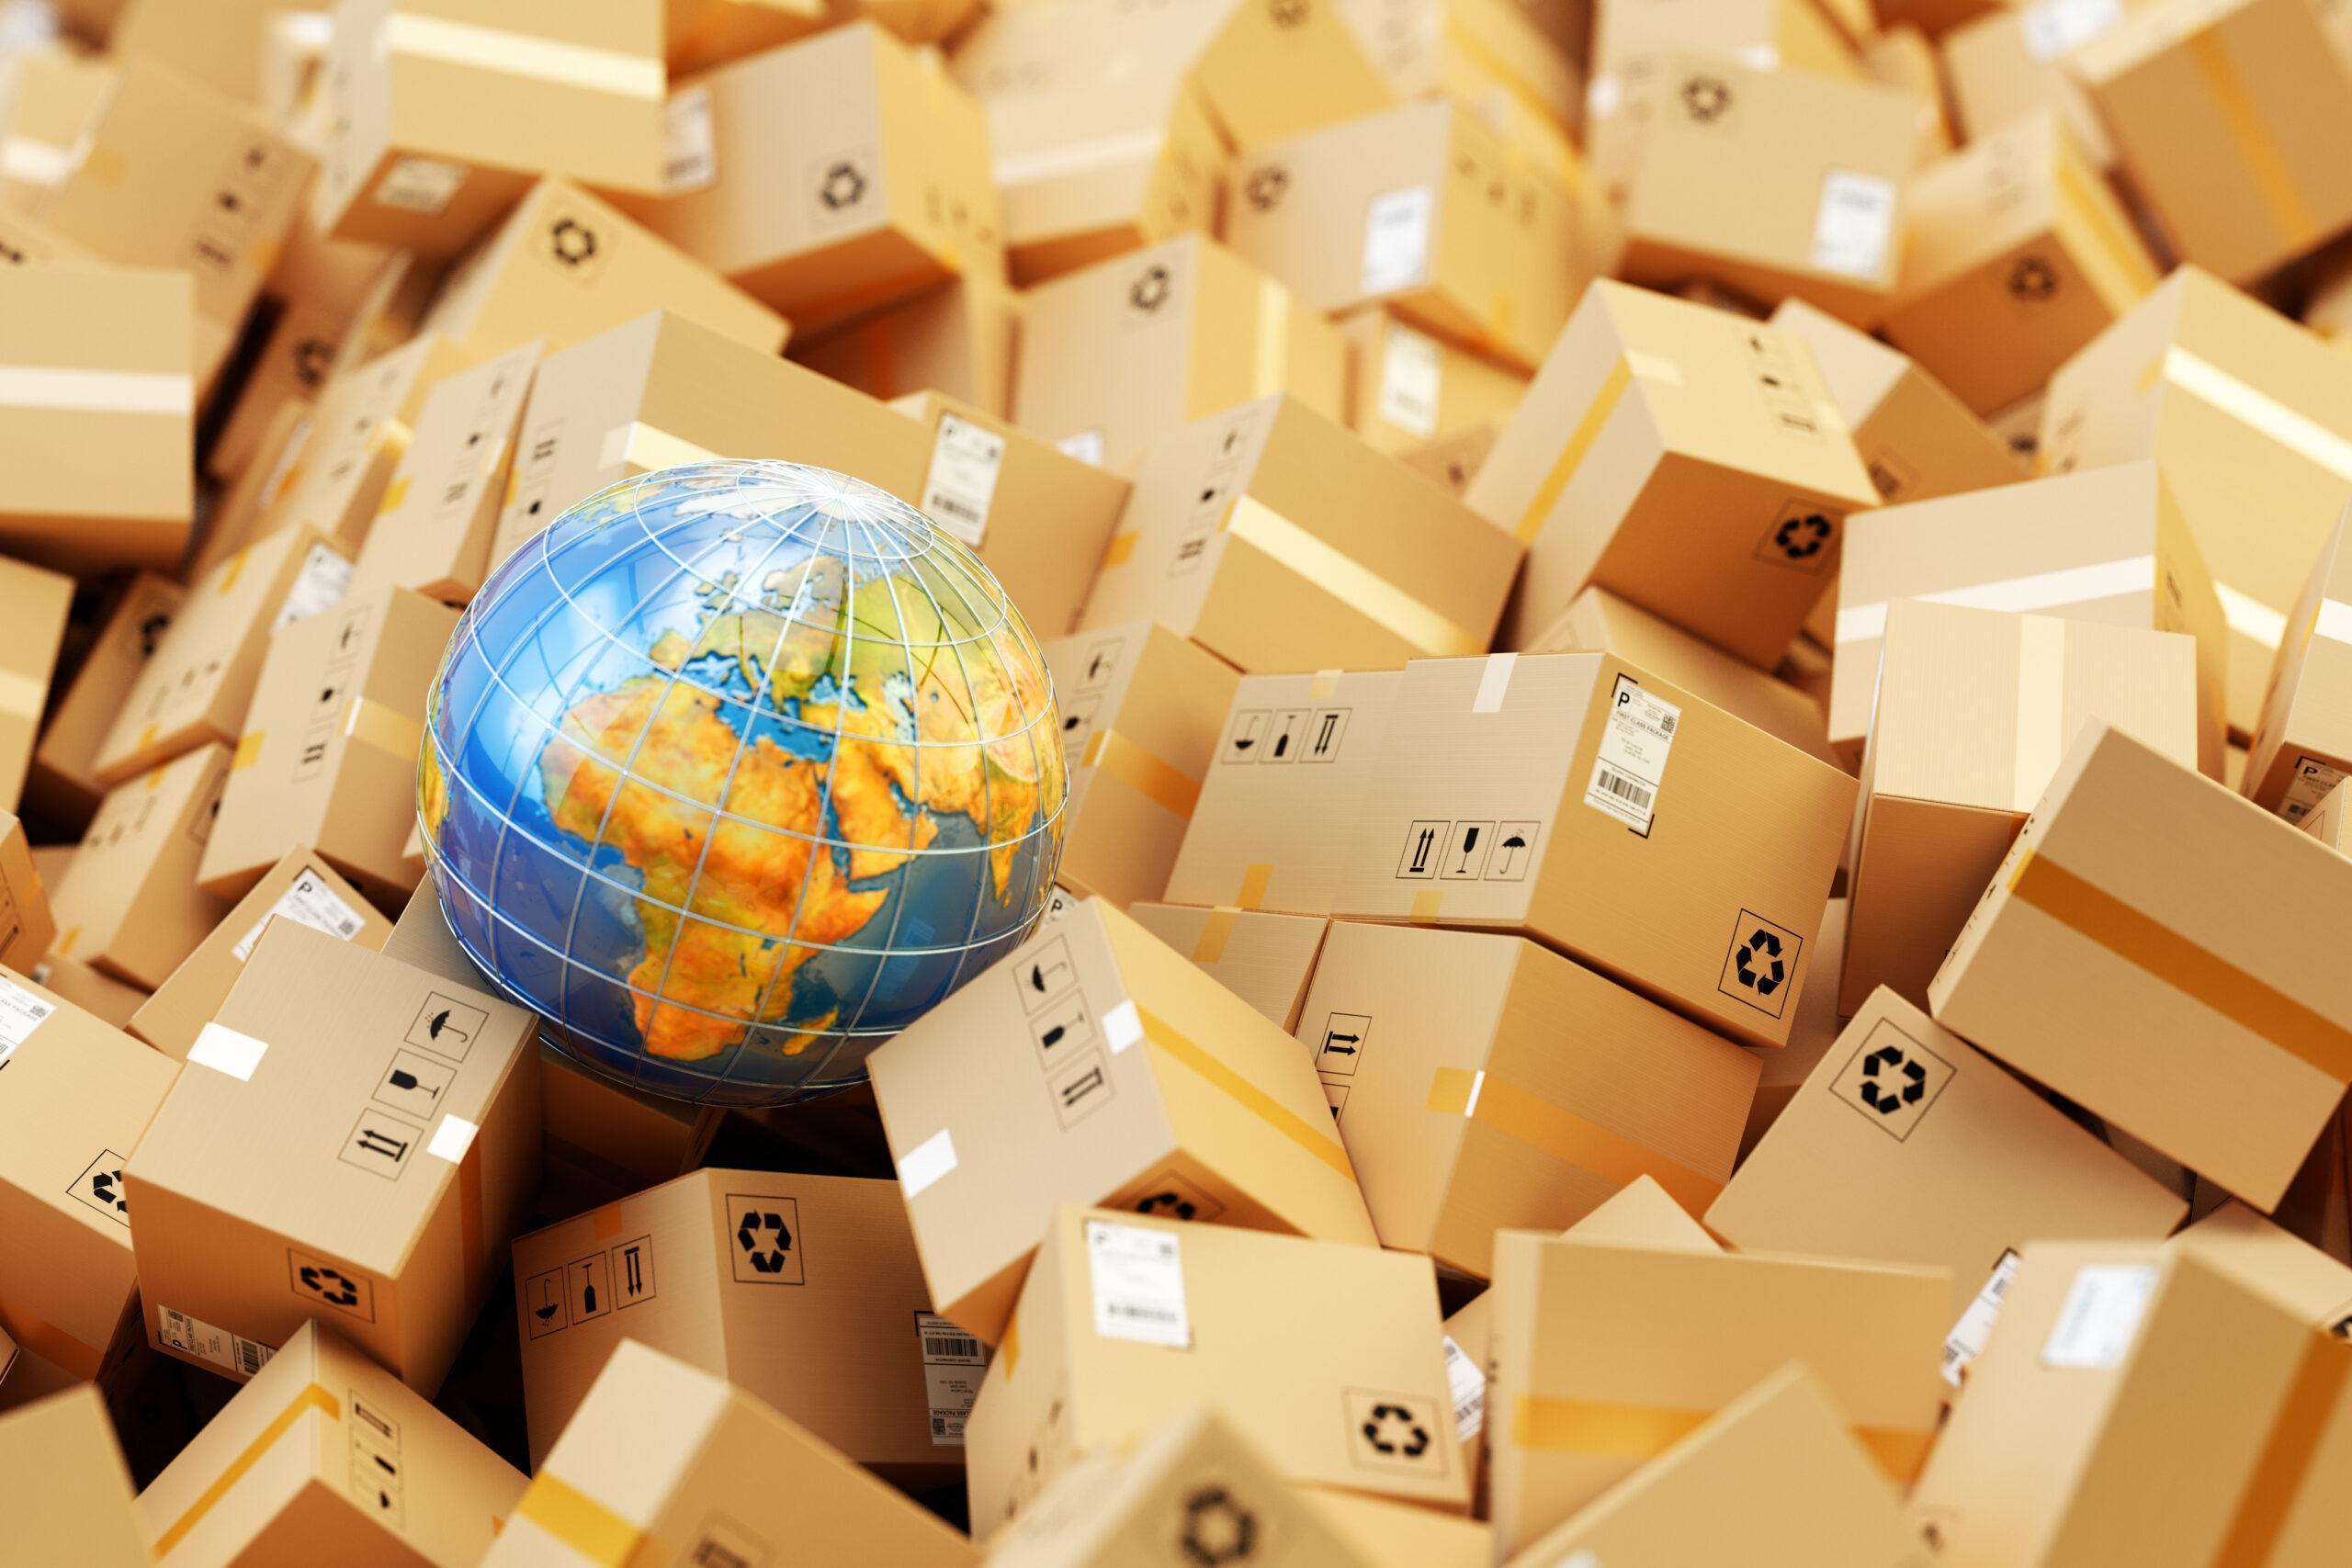 Distribution warehouse that ships packages worldwide